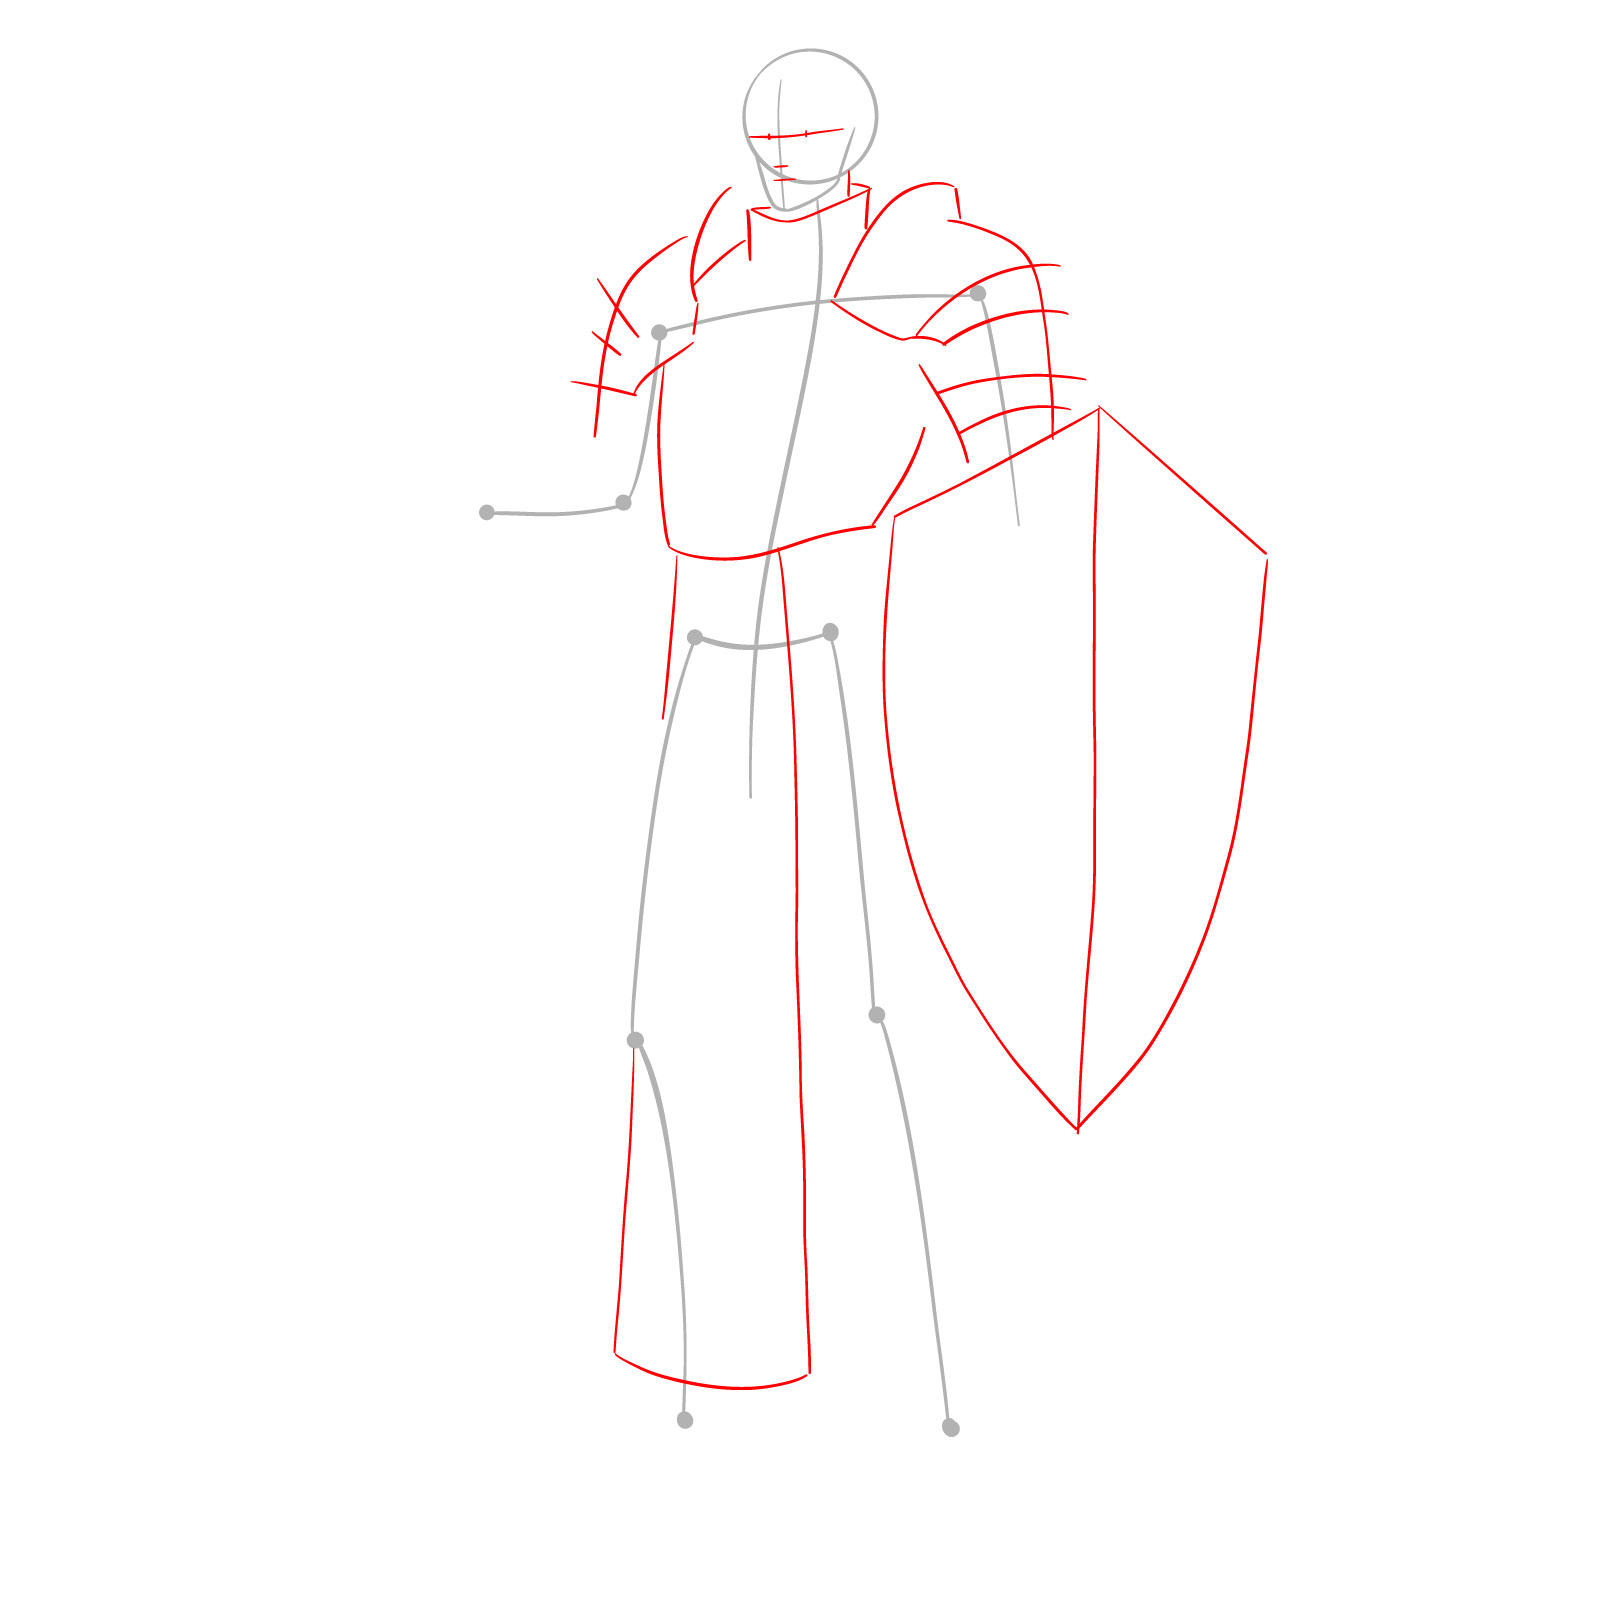 Adding facial features and basic body armor shapes to the paladin drawing - step 02